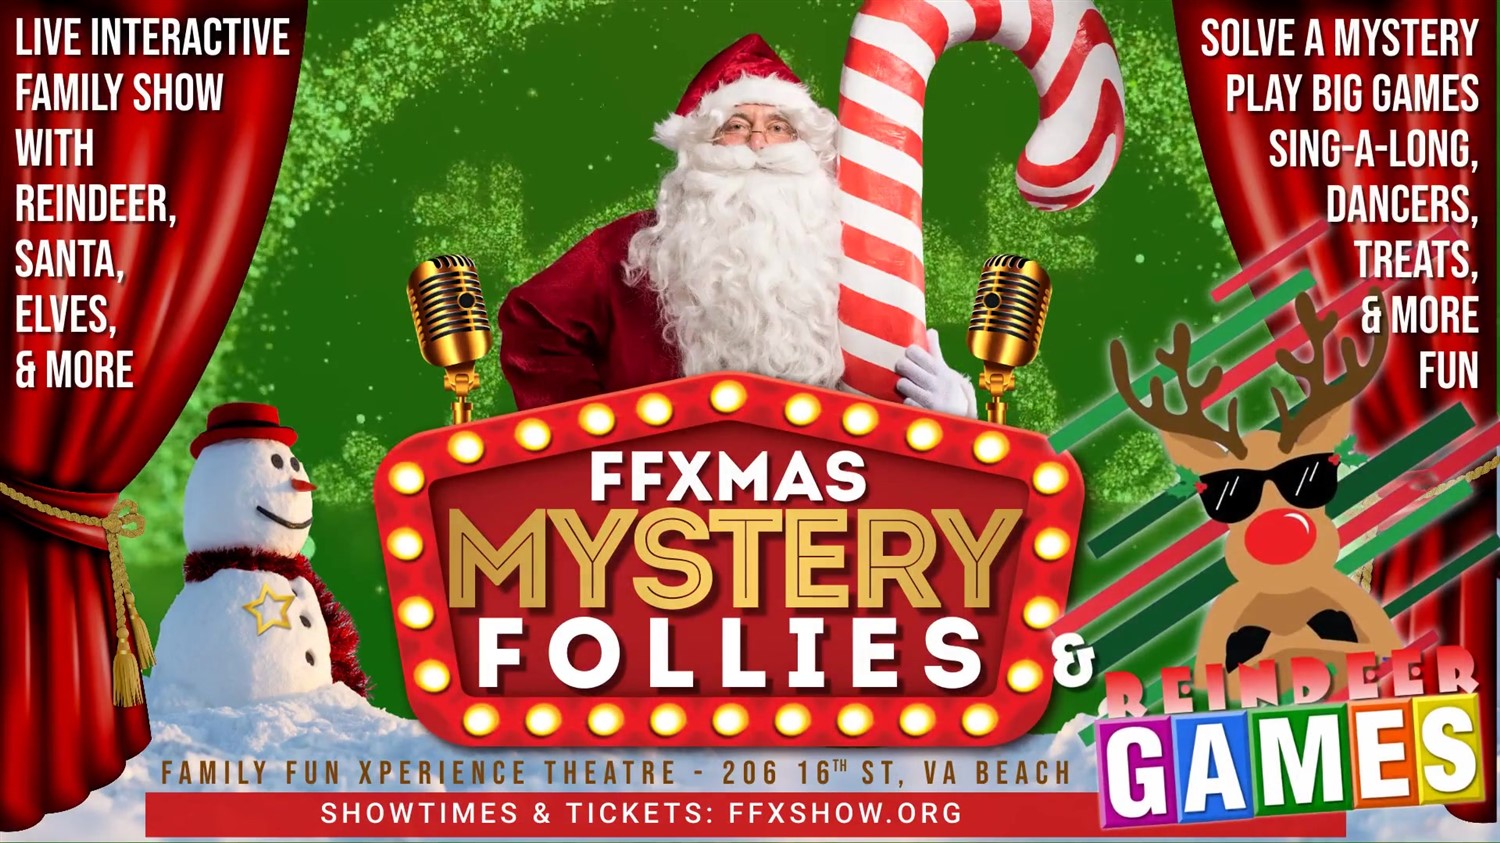 FFXmas MYSTERY FOLLIES Plus Bonus Reindeer Games on Dec 24, 16:00@FFX Theatre - Pick a seat, Buy tickets and Get information on Family Fun Xperience tickets.ffxshow.org